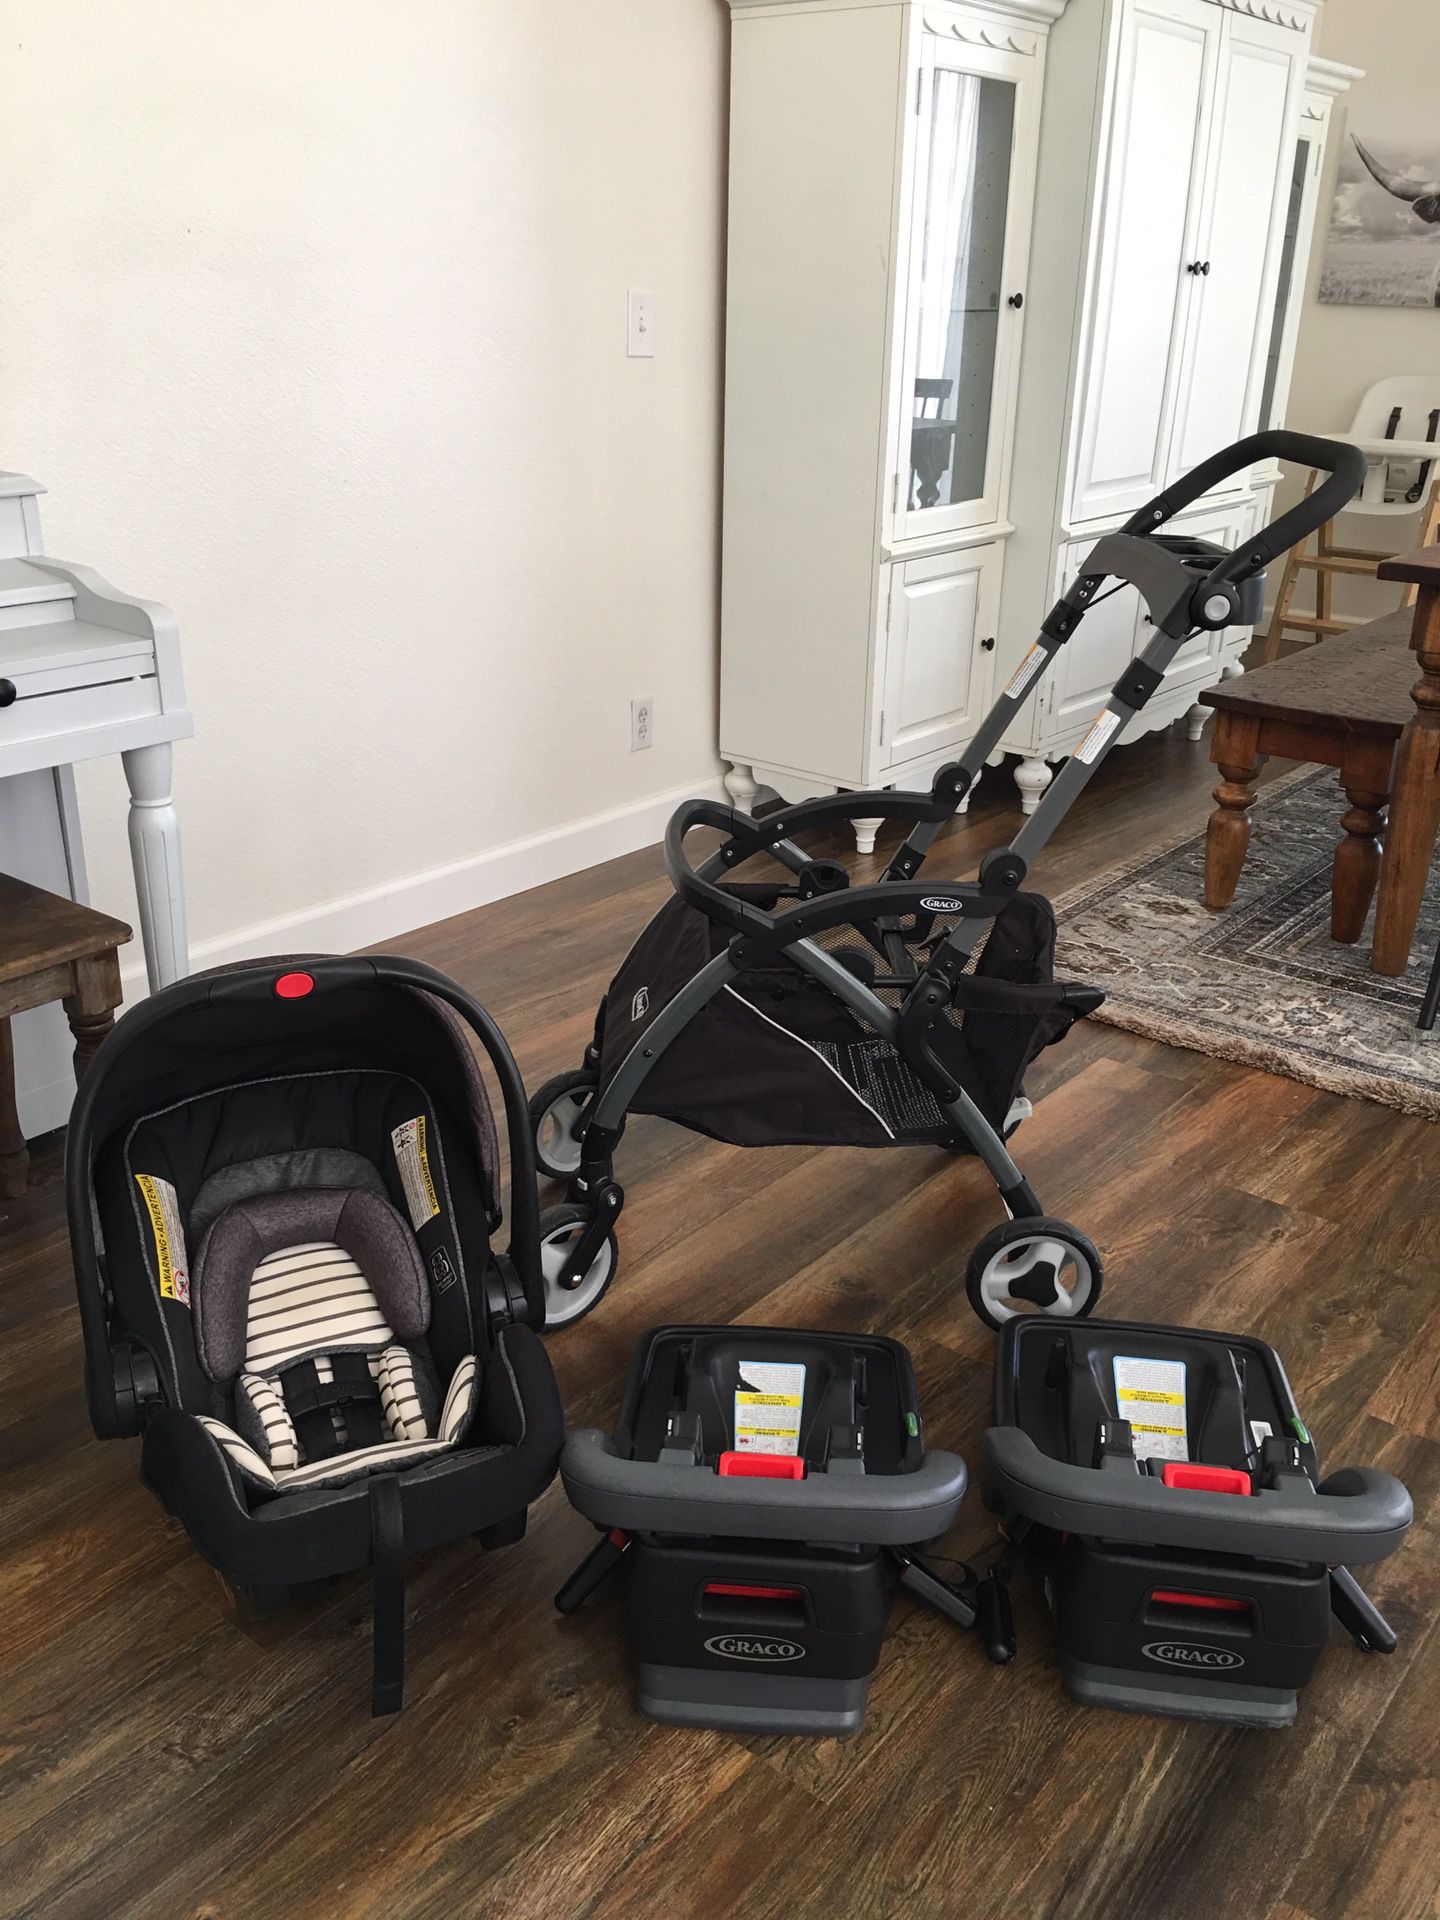 Graco car seat, stroller travel system, and two bases take it all for $150 Menifee pick up